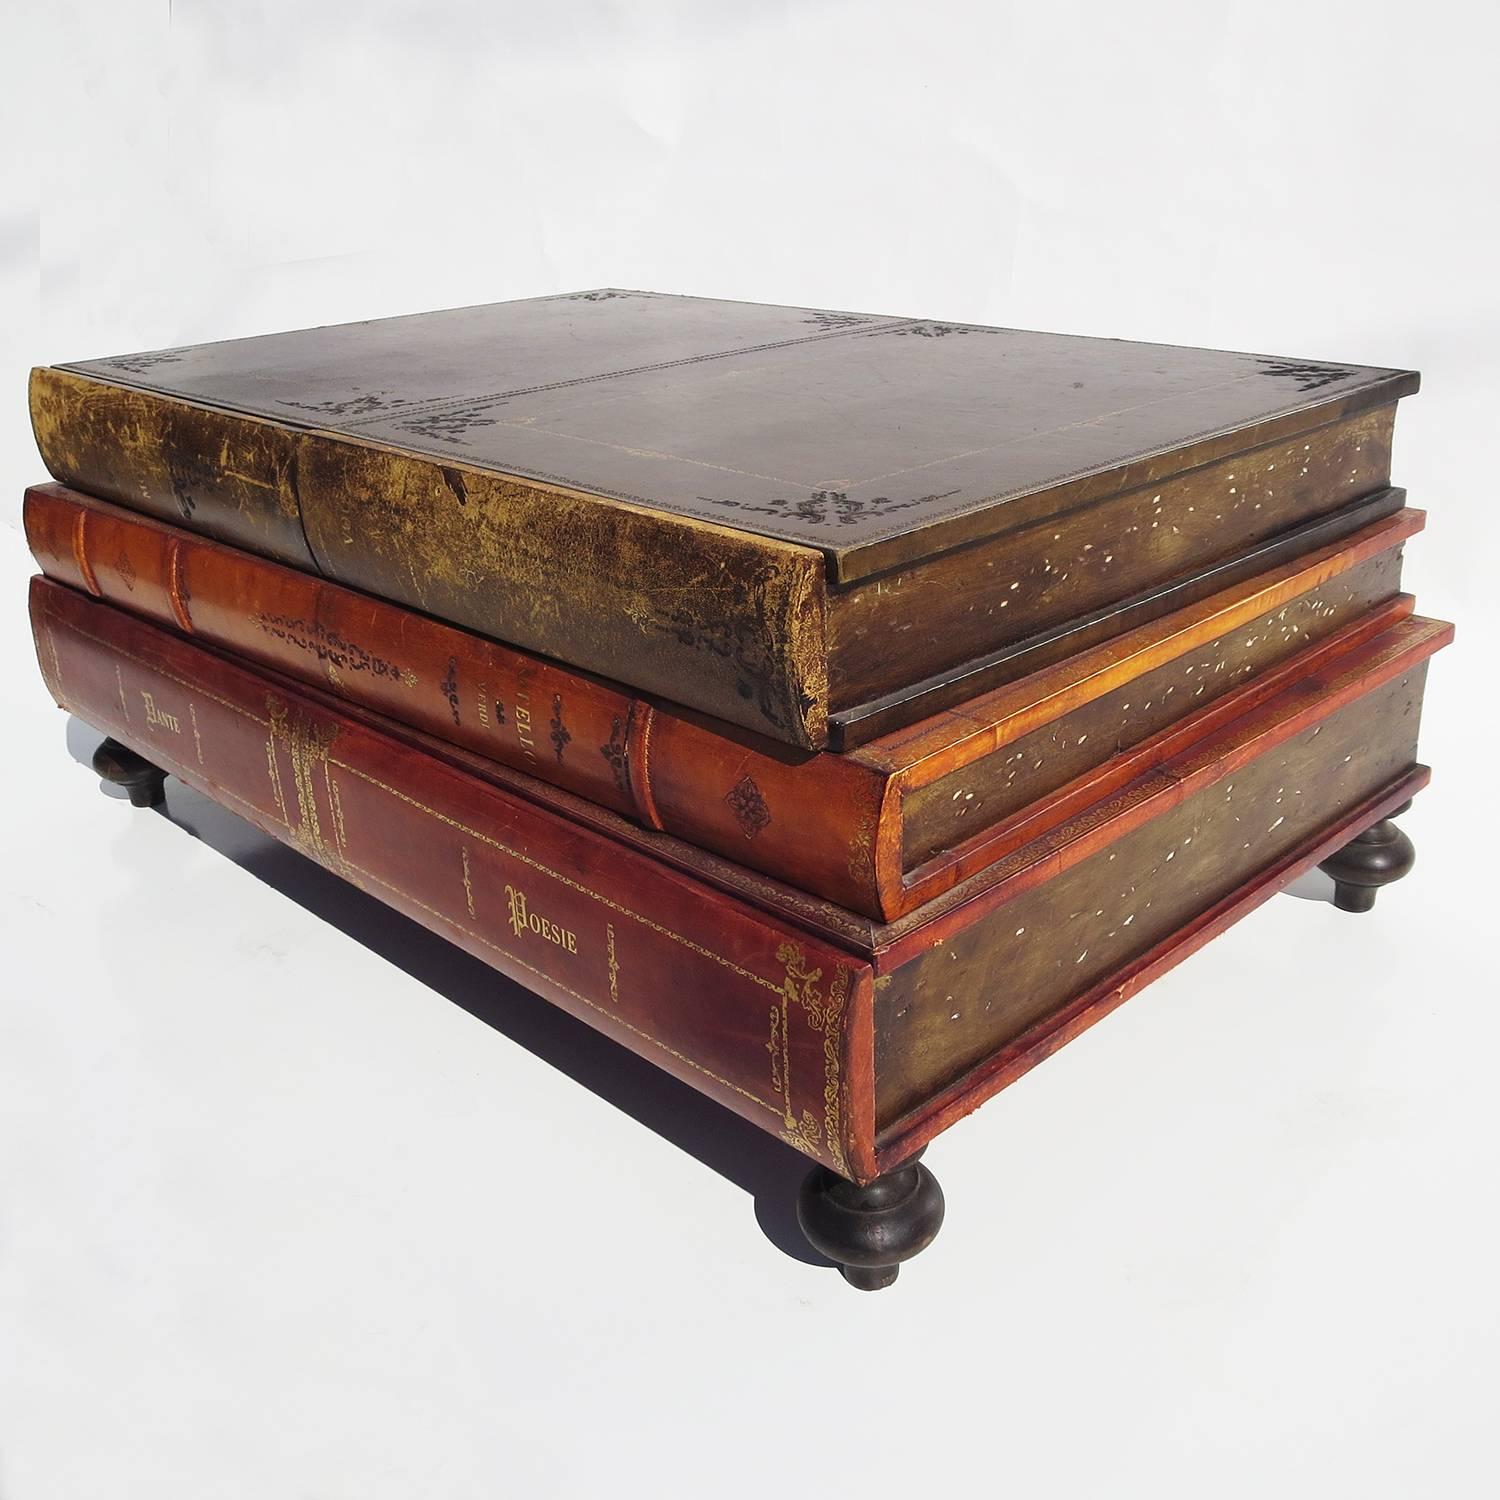 The perfect coffee table for your home library! The stacked books are wrapped in a wonderfully aged leather, with titles like Dante, Otello and Mozart. The top book has two concealed drawers and the bottom book has one long drawer inside. The books